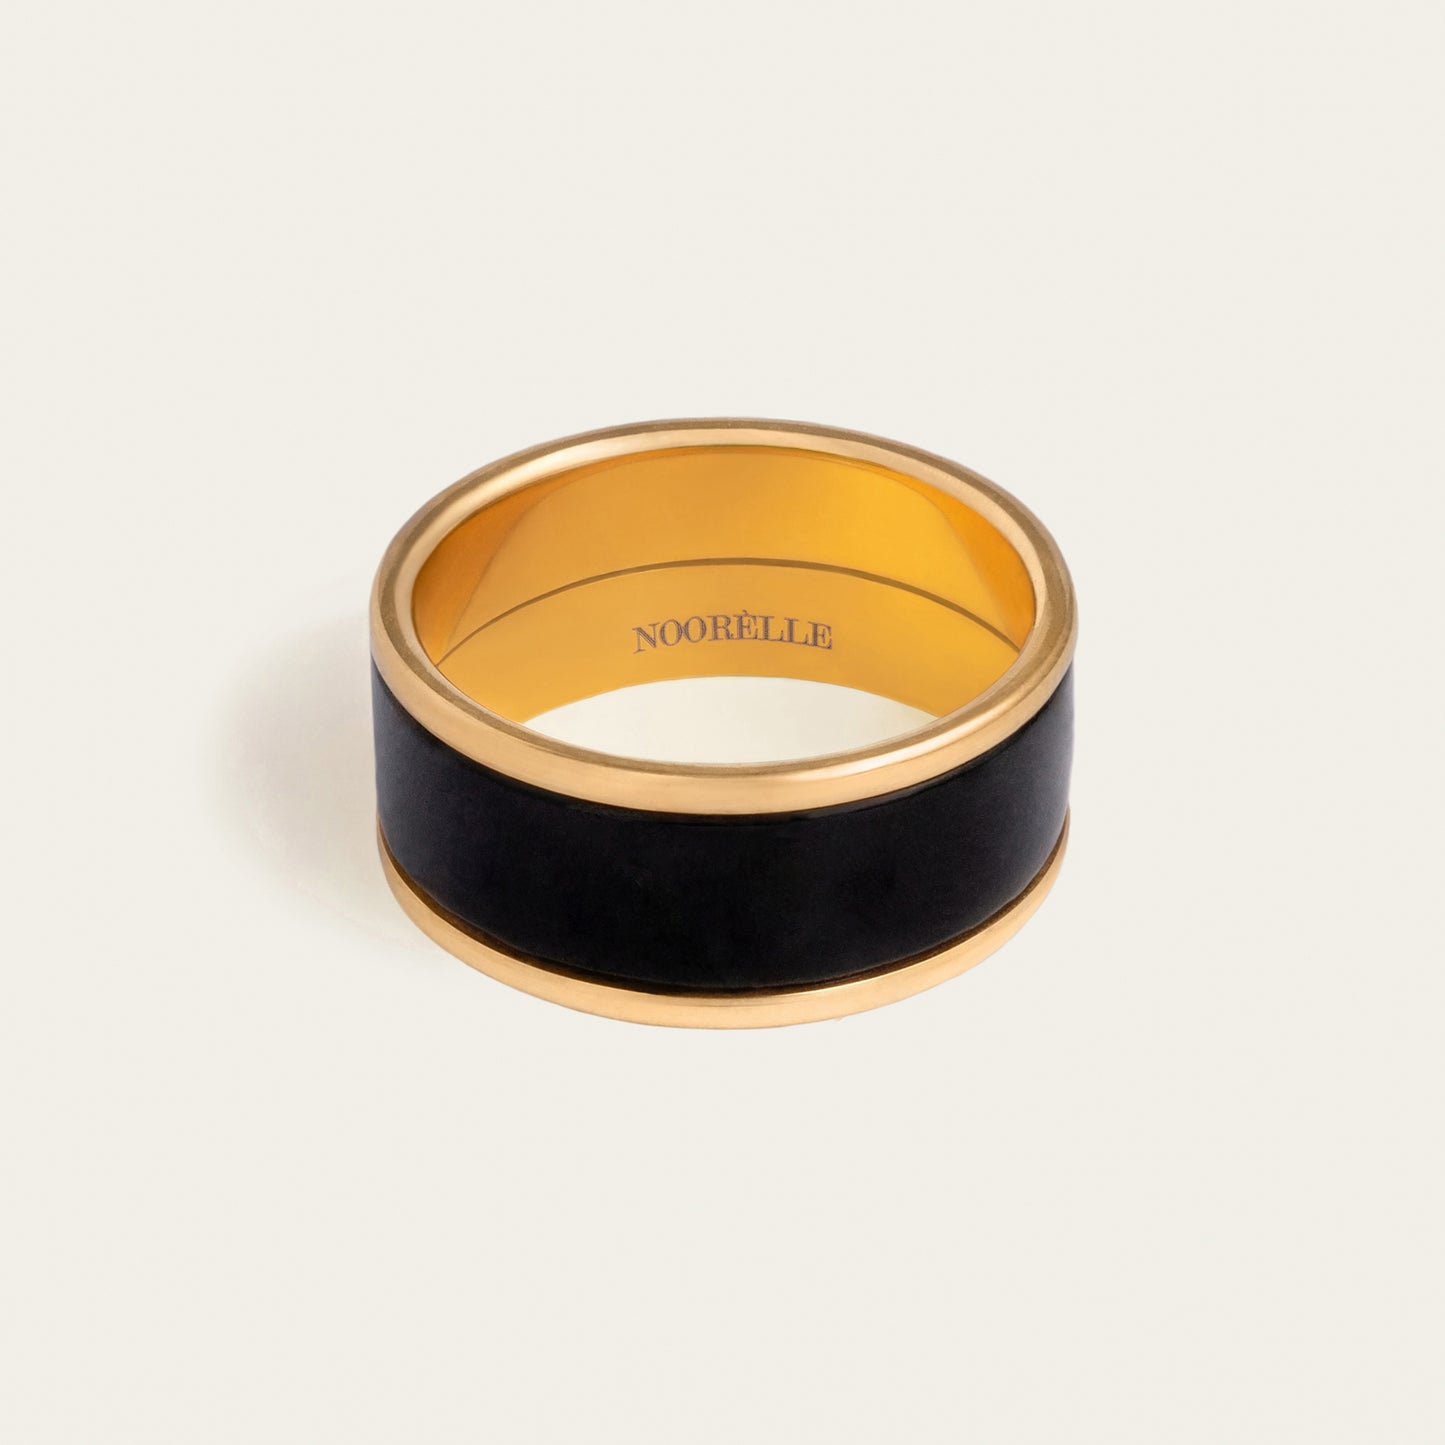 noorelle, monochrome black ring, monochrome ring, jewellery , gold and balck ring,